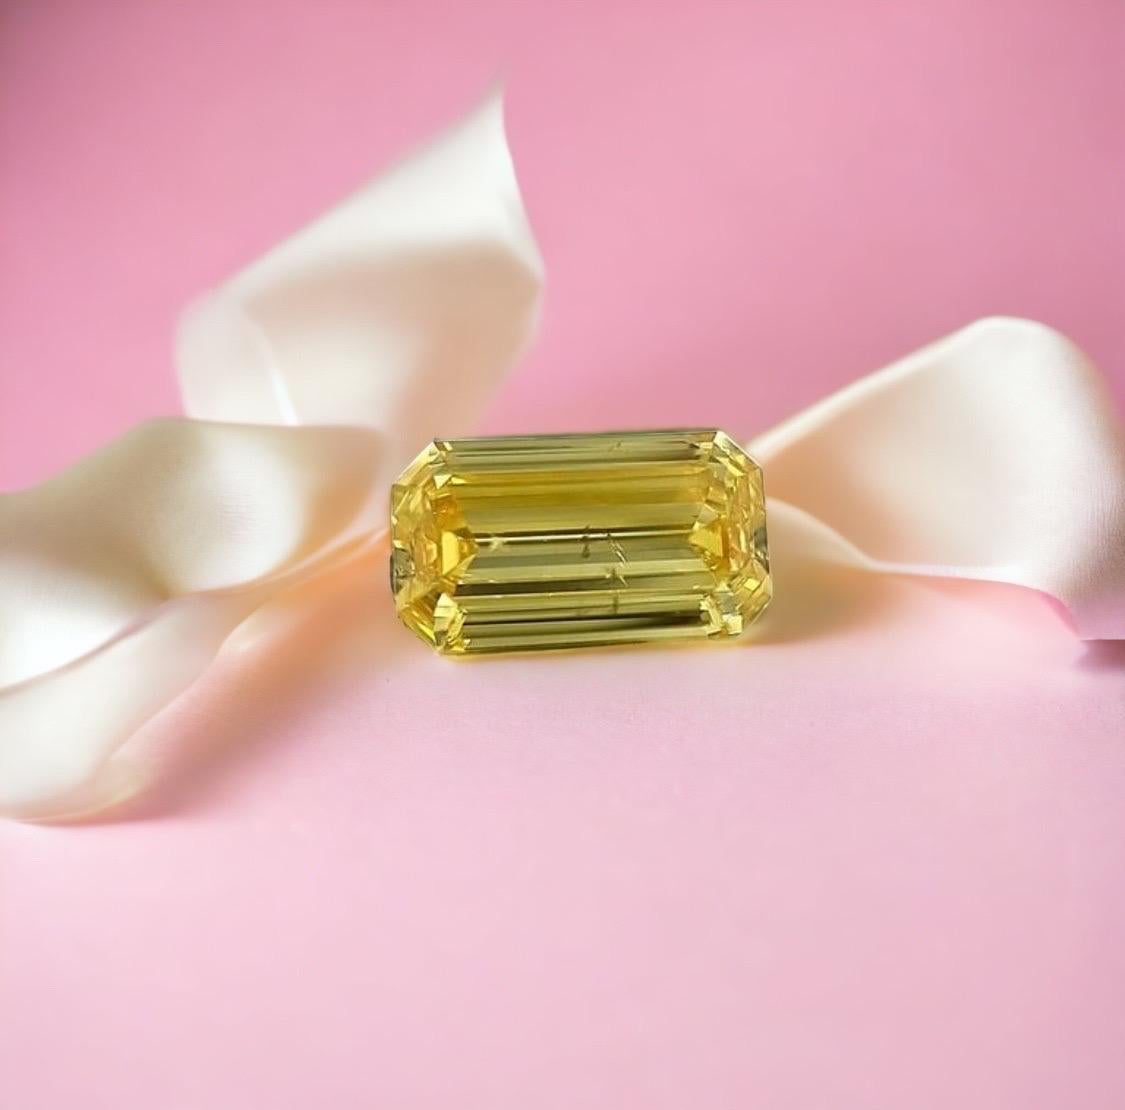 Rare natural vivid yellow diamond 1.08 carat emerald cut, a rare shape in over 1.00 carat diamond, far rarer than the colorless diamond and super rare from Zimmi especially with high color intensity or vividness. 
GIA certificated.  

Available as